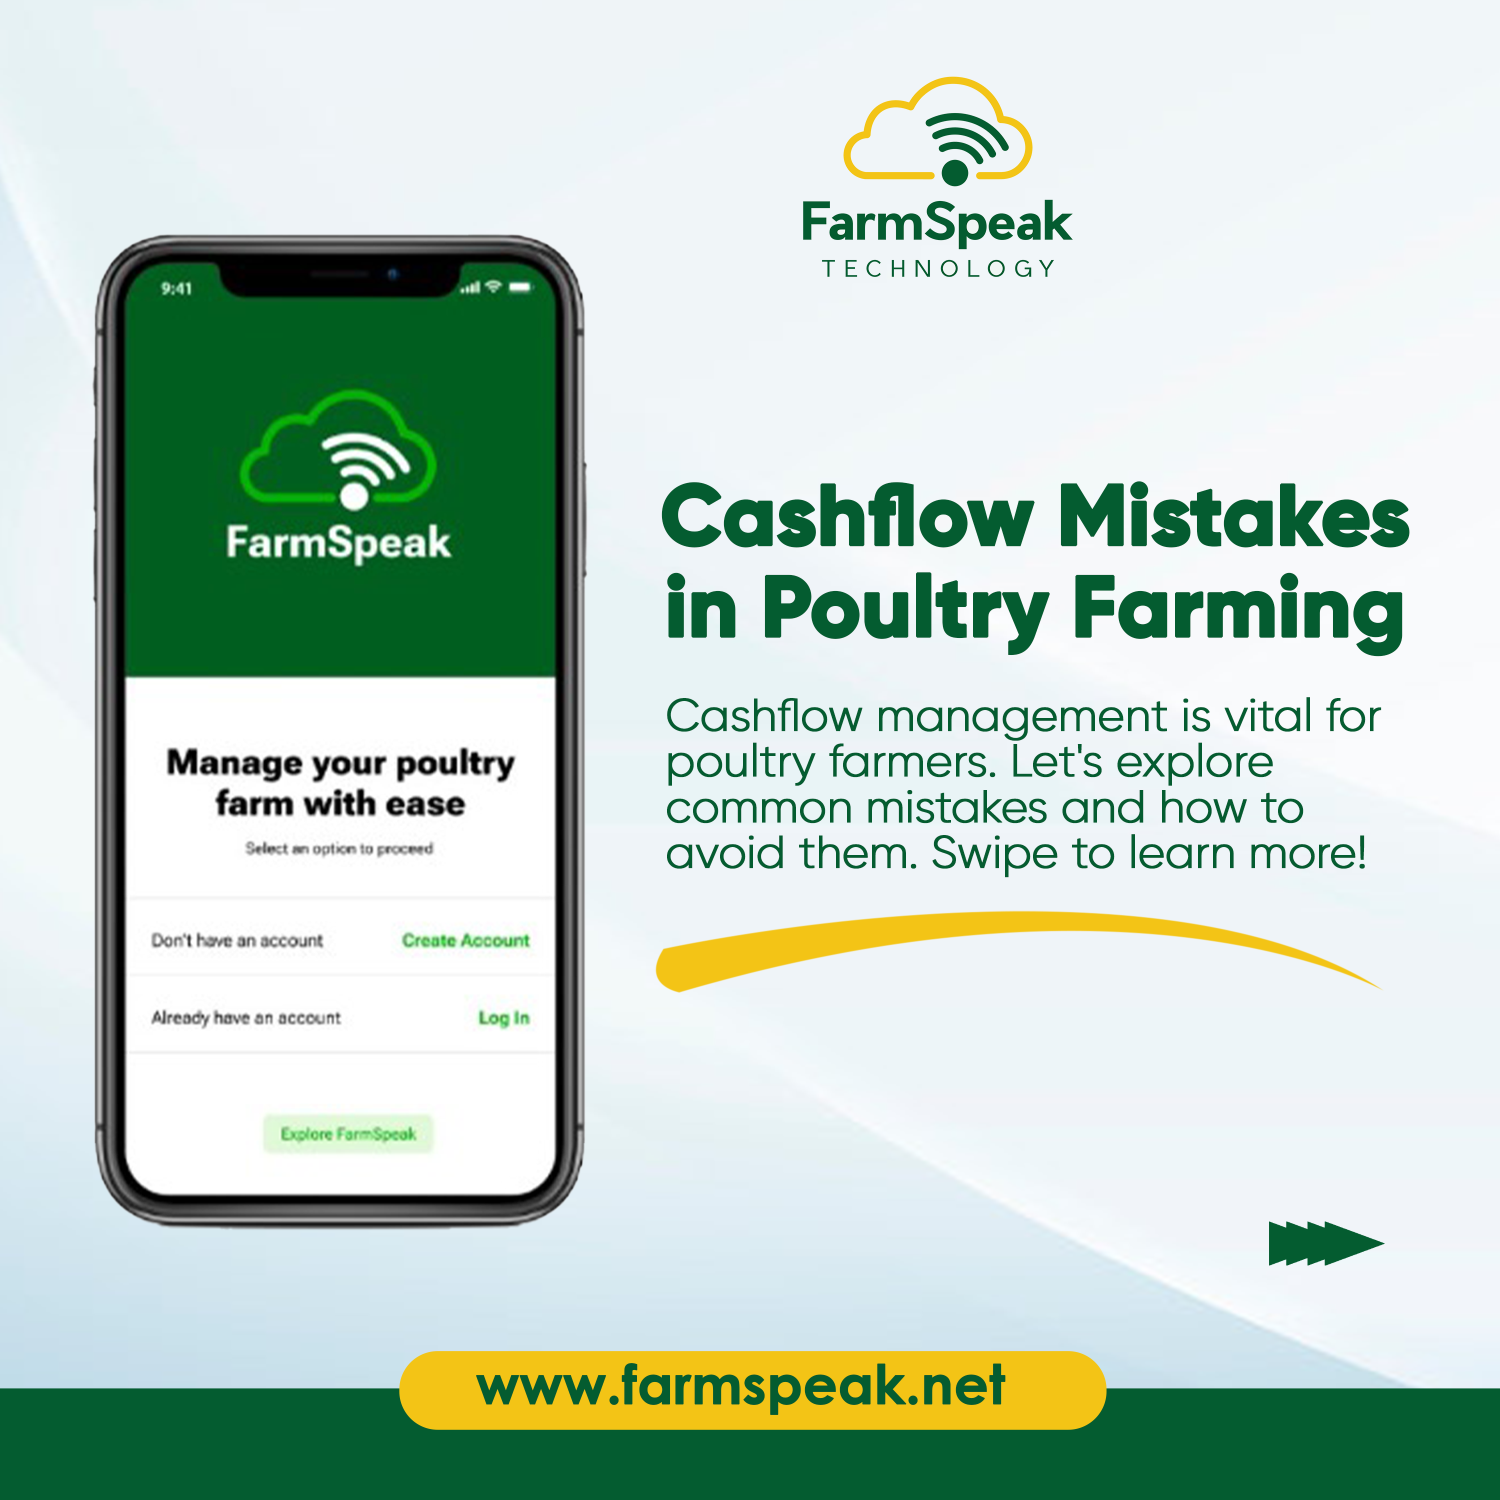 Boost Your Poultry Farm’s Cashflow with FS Manager